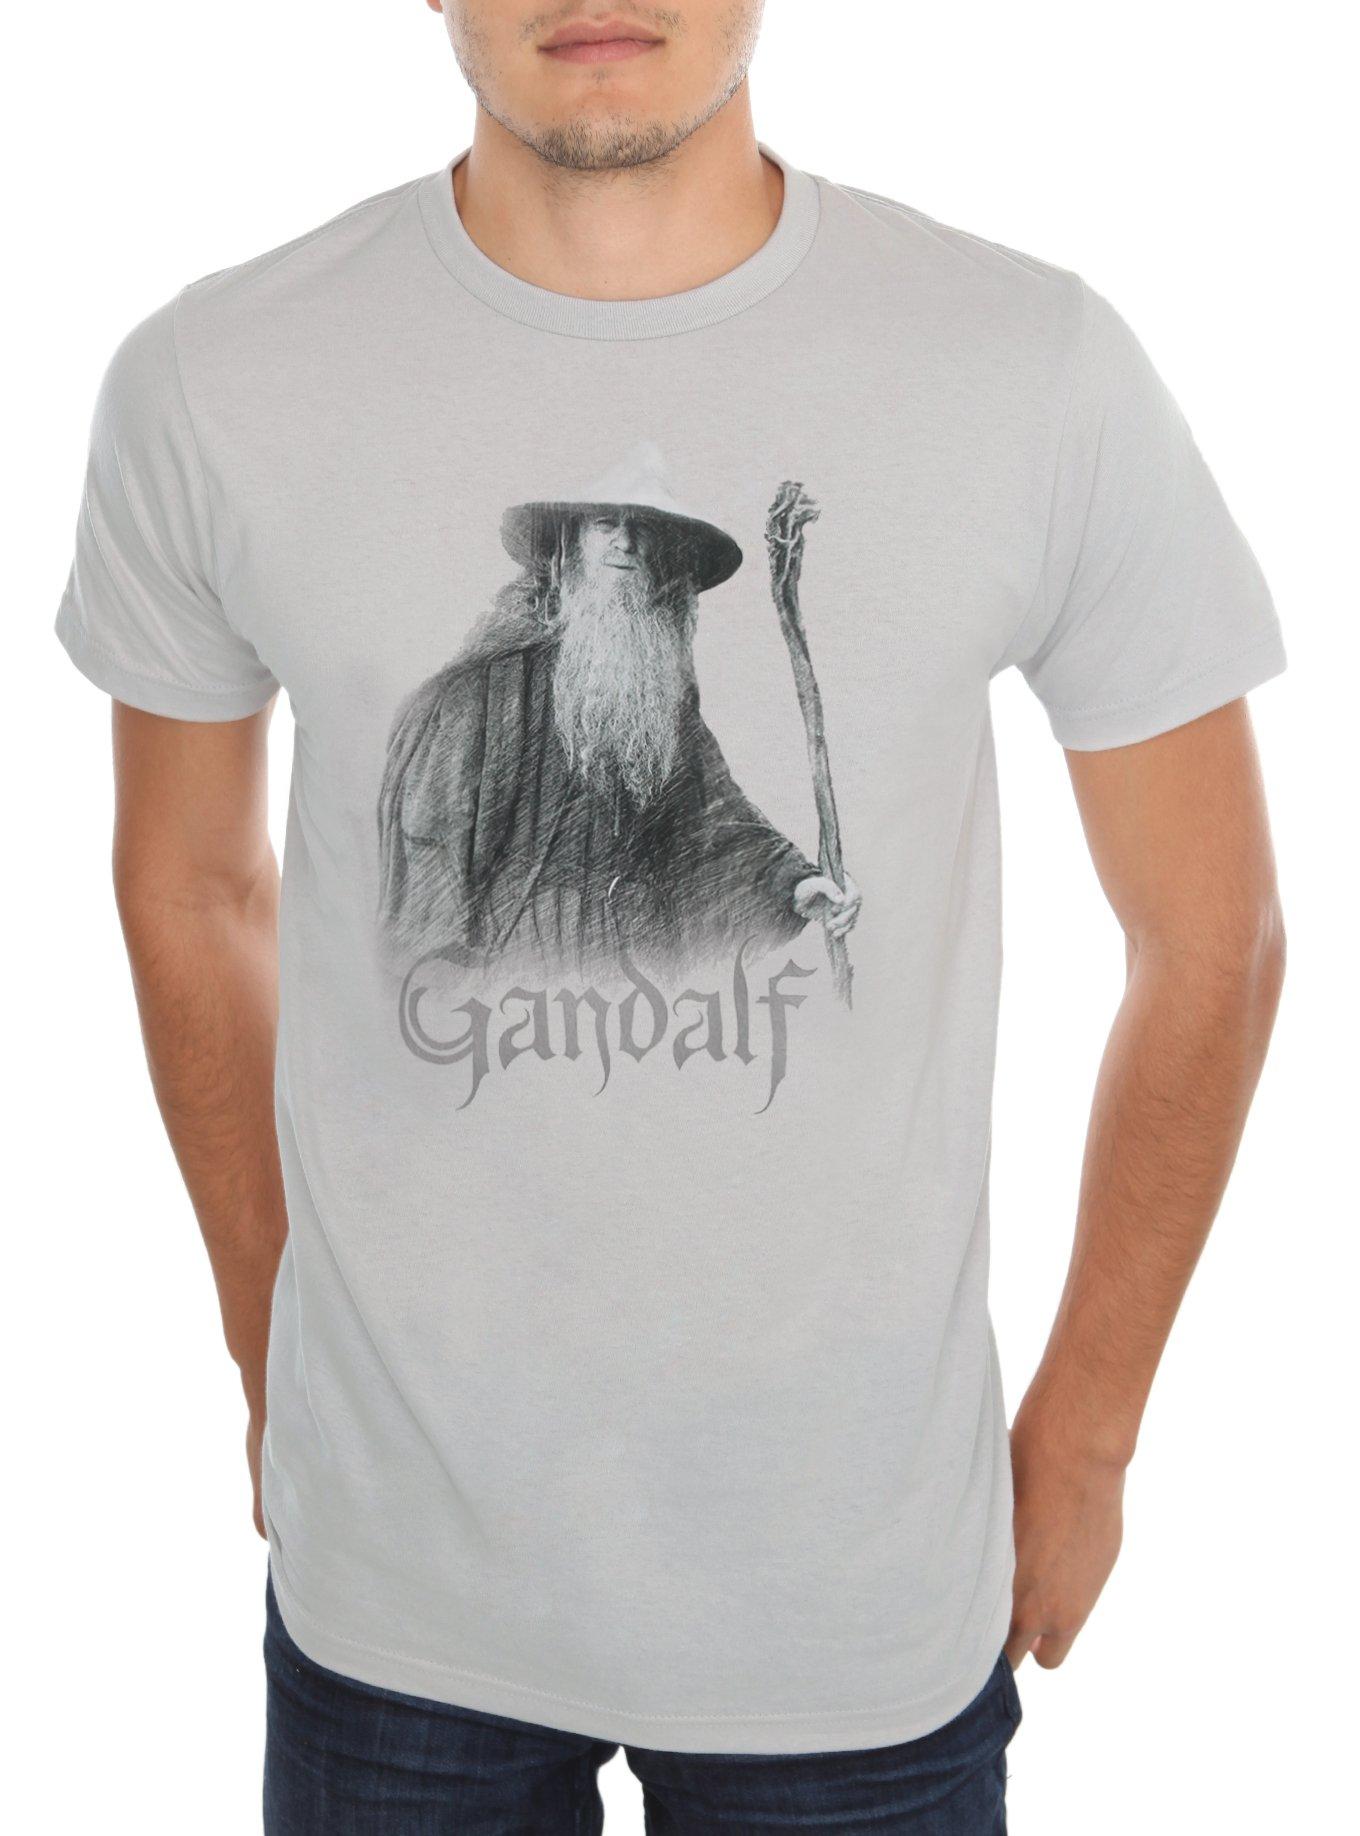 The Lord Of The Rings Gandalf The Grey T-Shirt, BLACK, hi-res